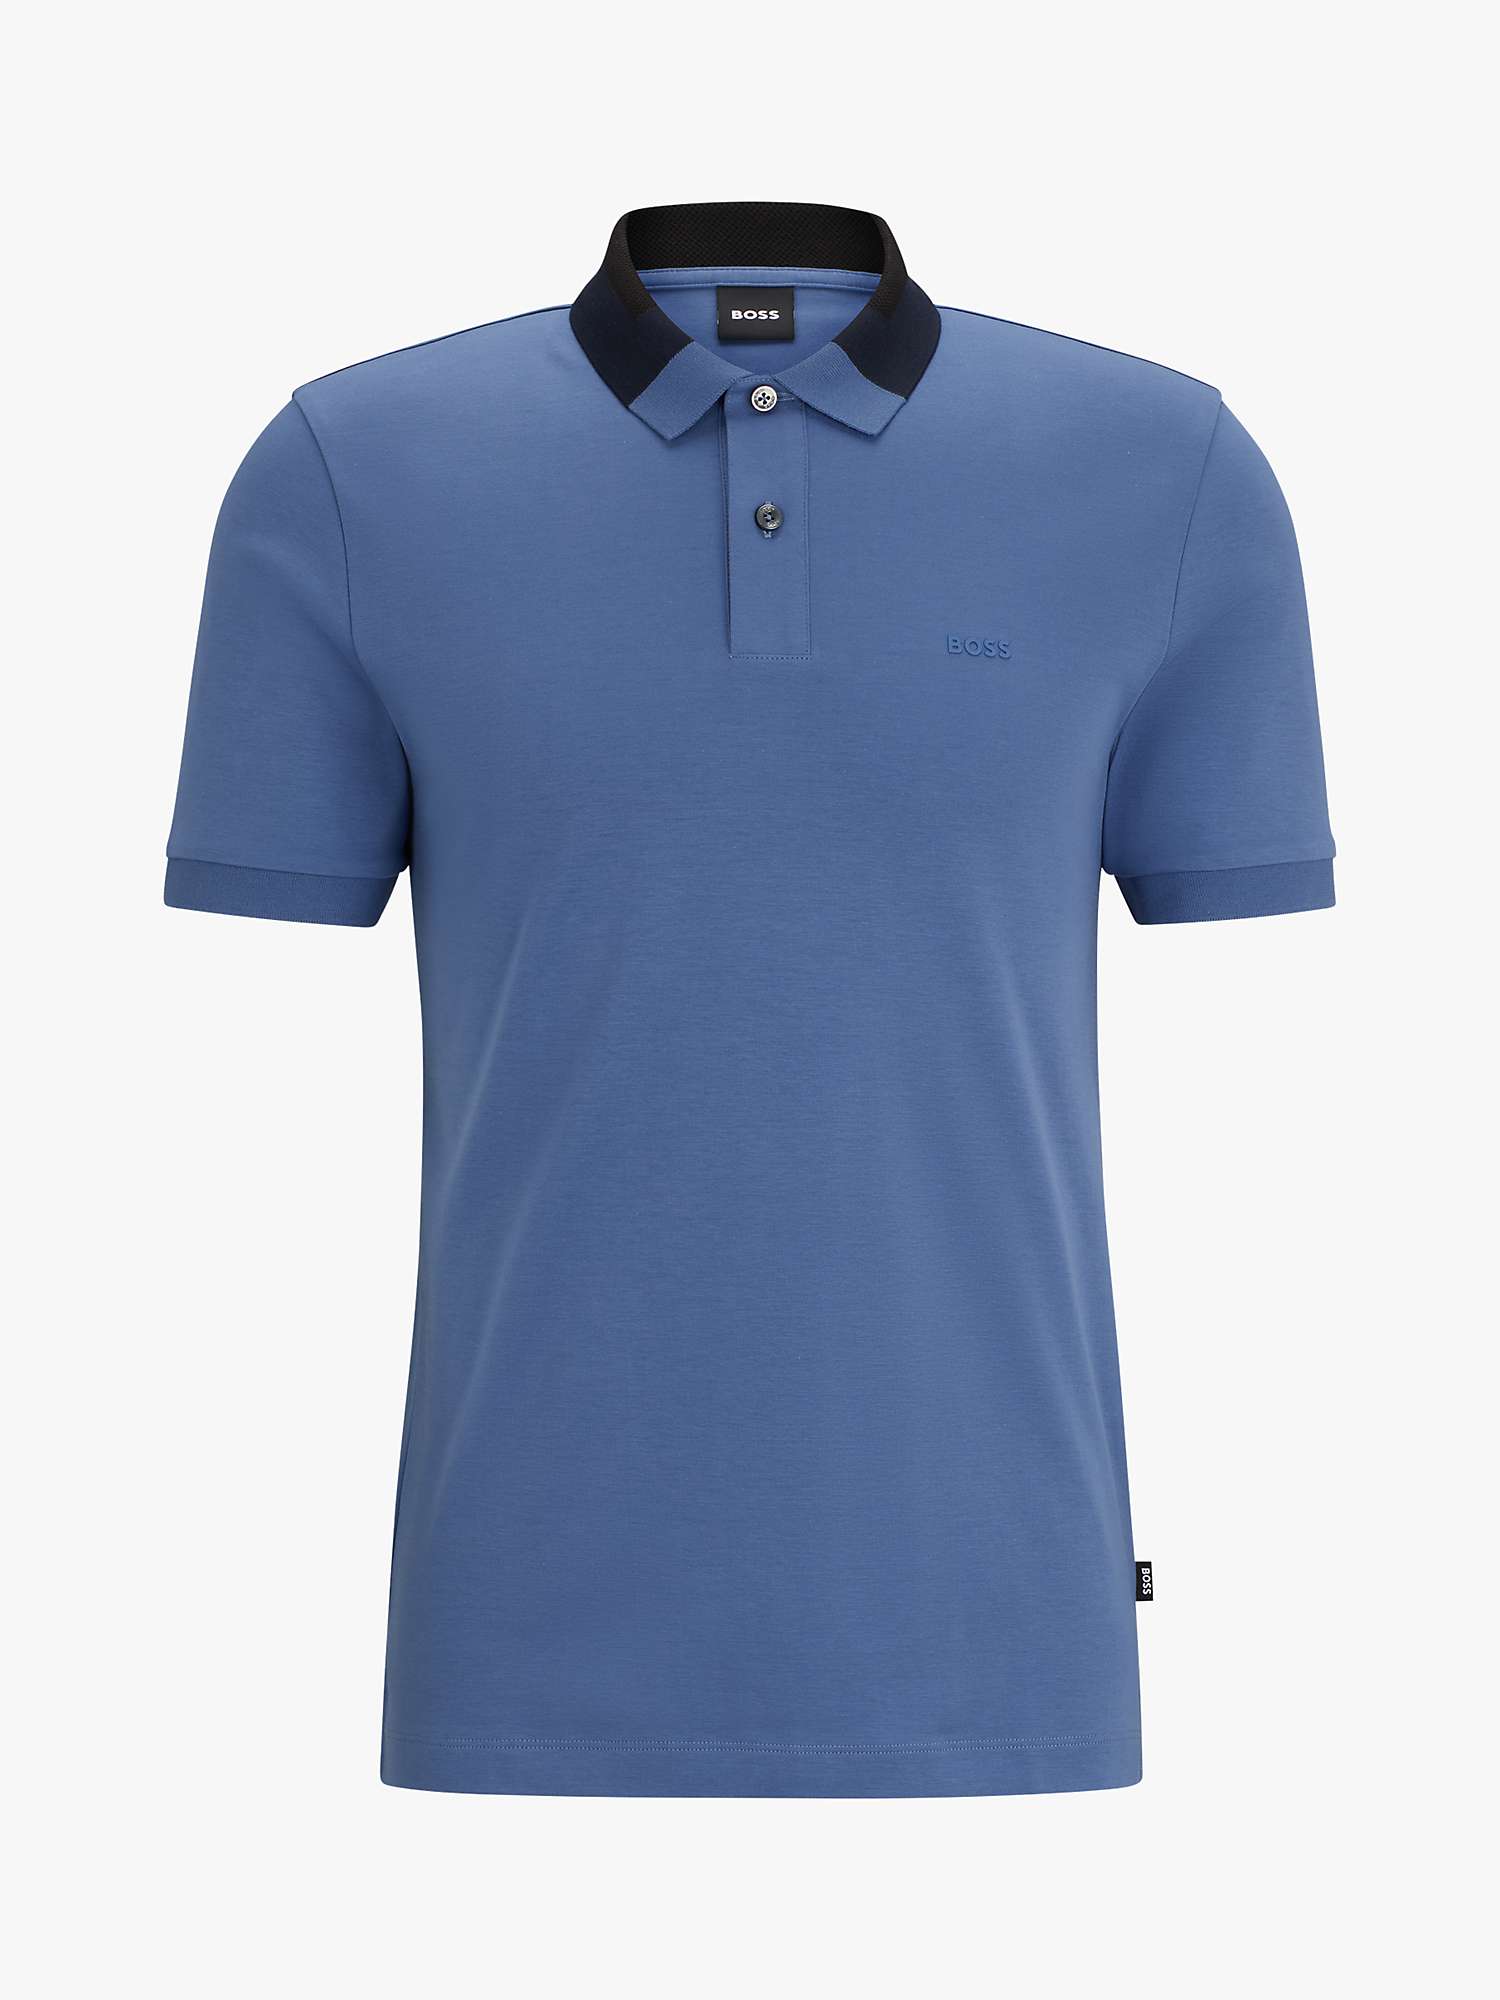 Buy BOSS Phillipson Cotton Polo Shirt, Blue Online at johnlewis.com